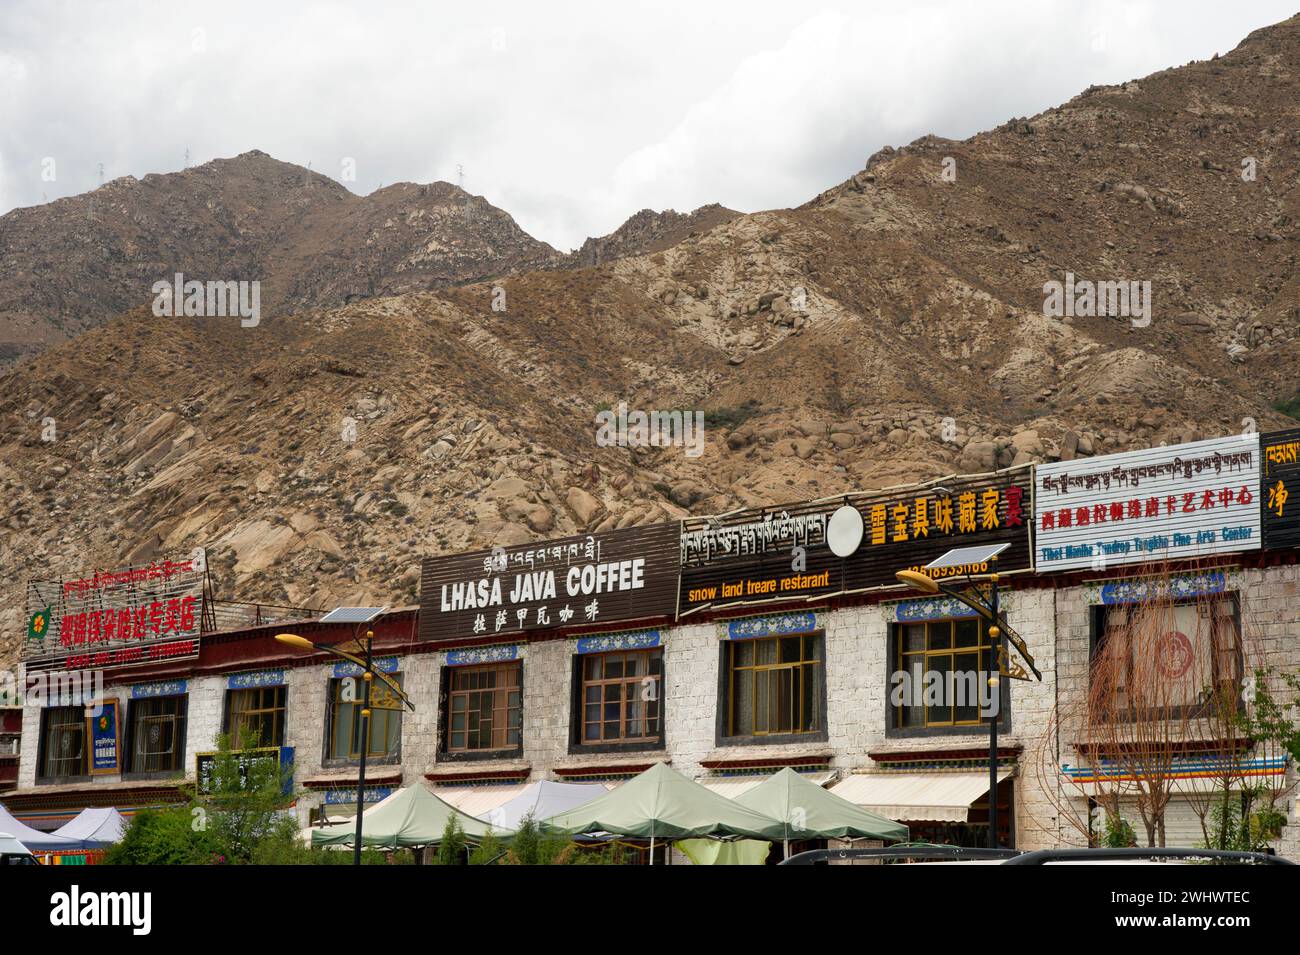 Signs written in Chinese carachters, Tibetan script and English mark a shops in a strip mall in Lhasa area of Tibet Autonomous Region of China. Stock Photo